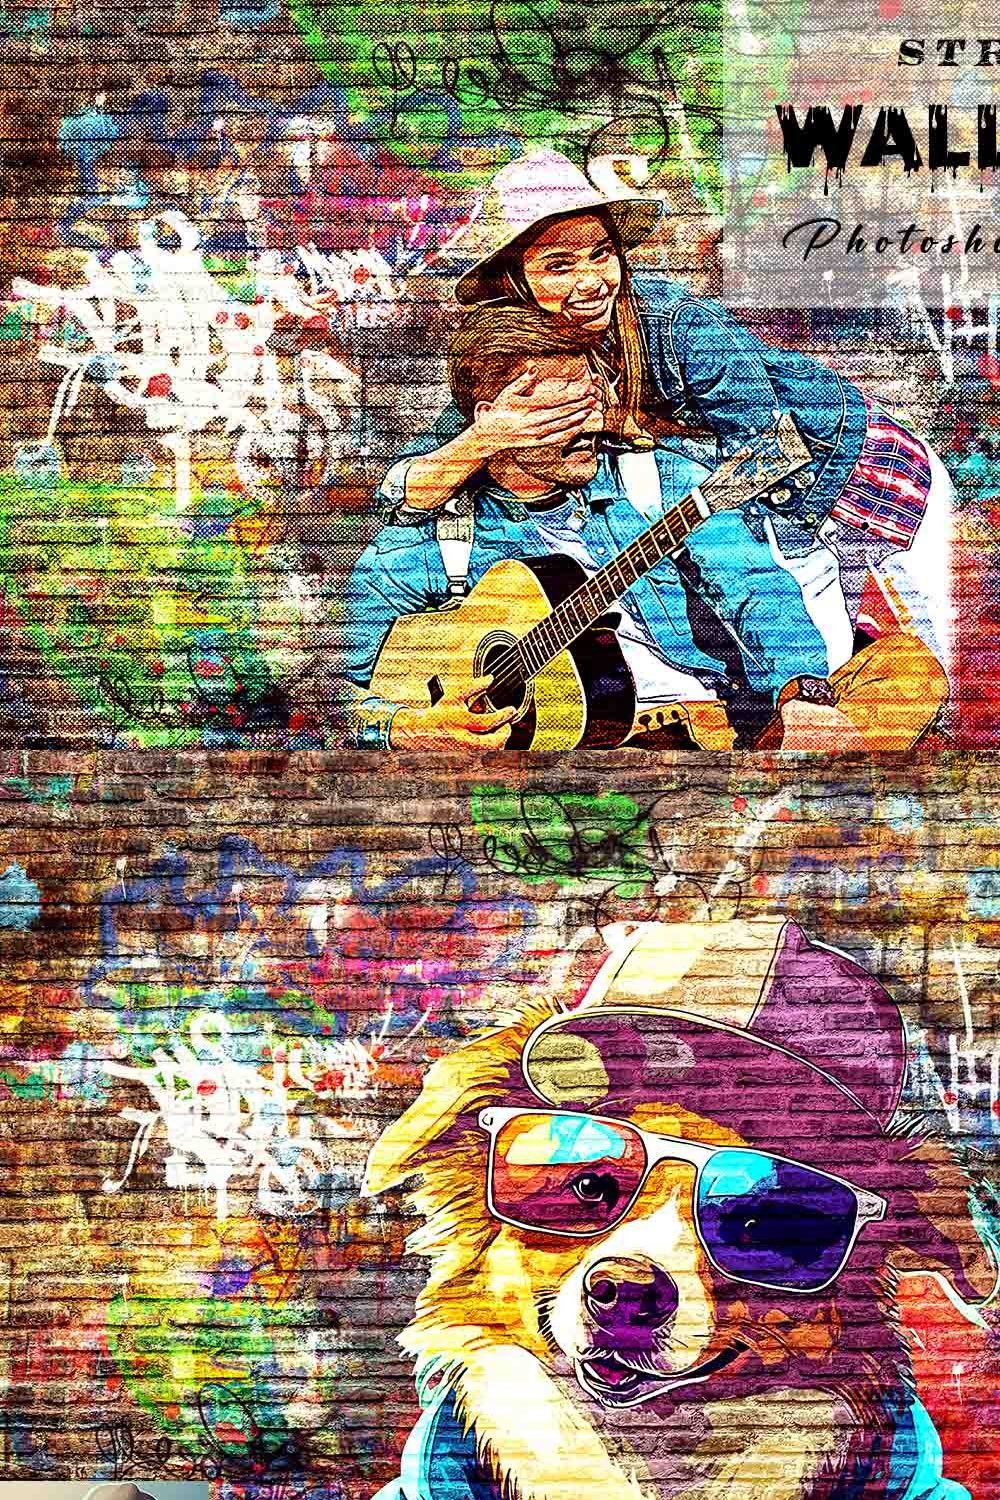 Street Wall Art Photoshop Action pinterest preview image.